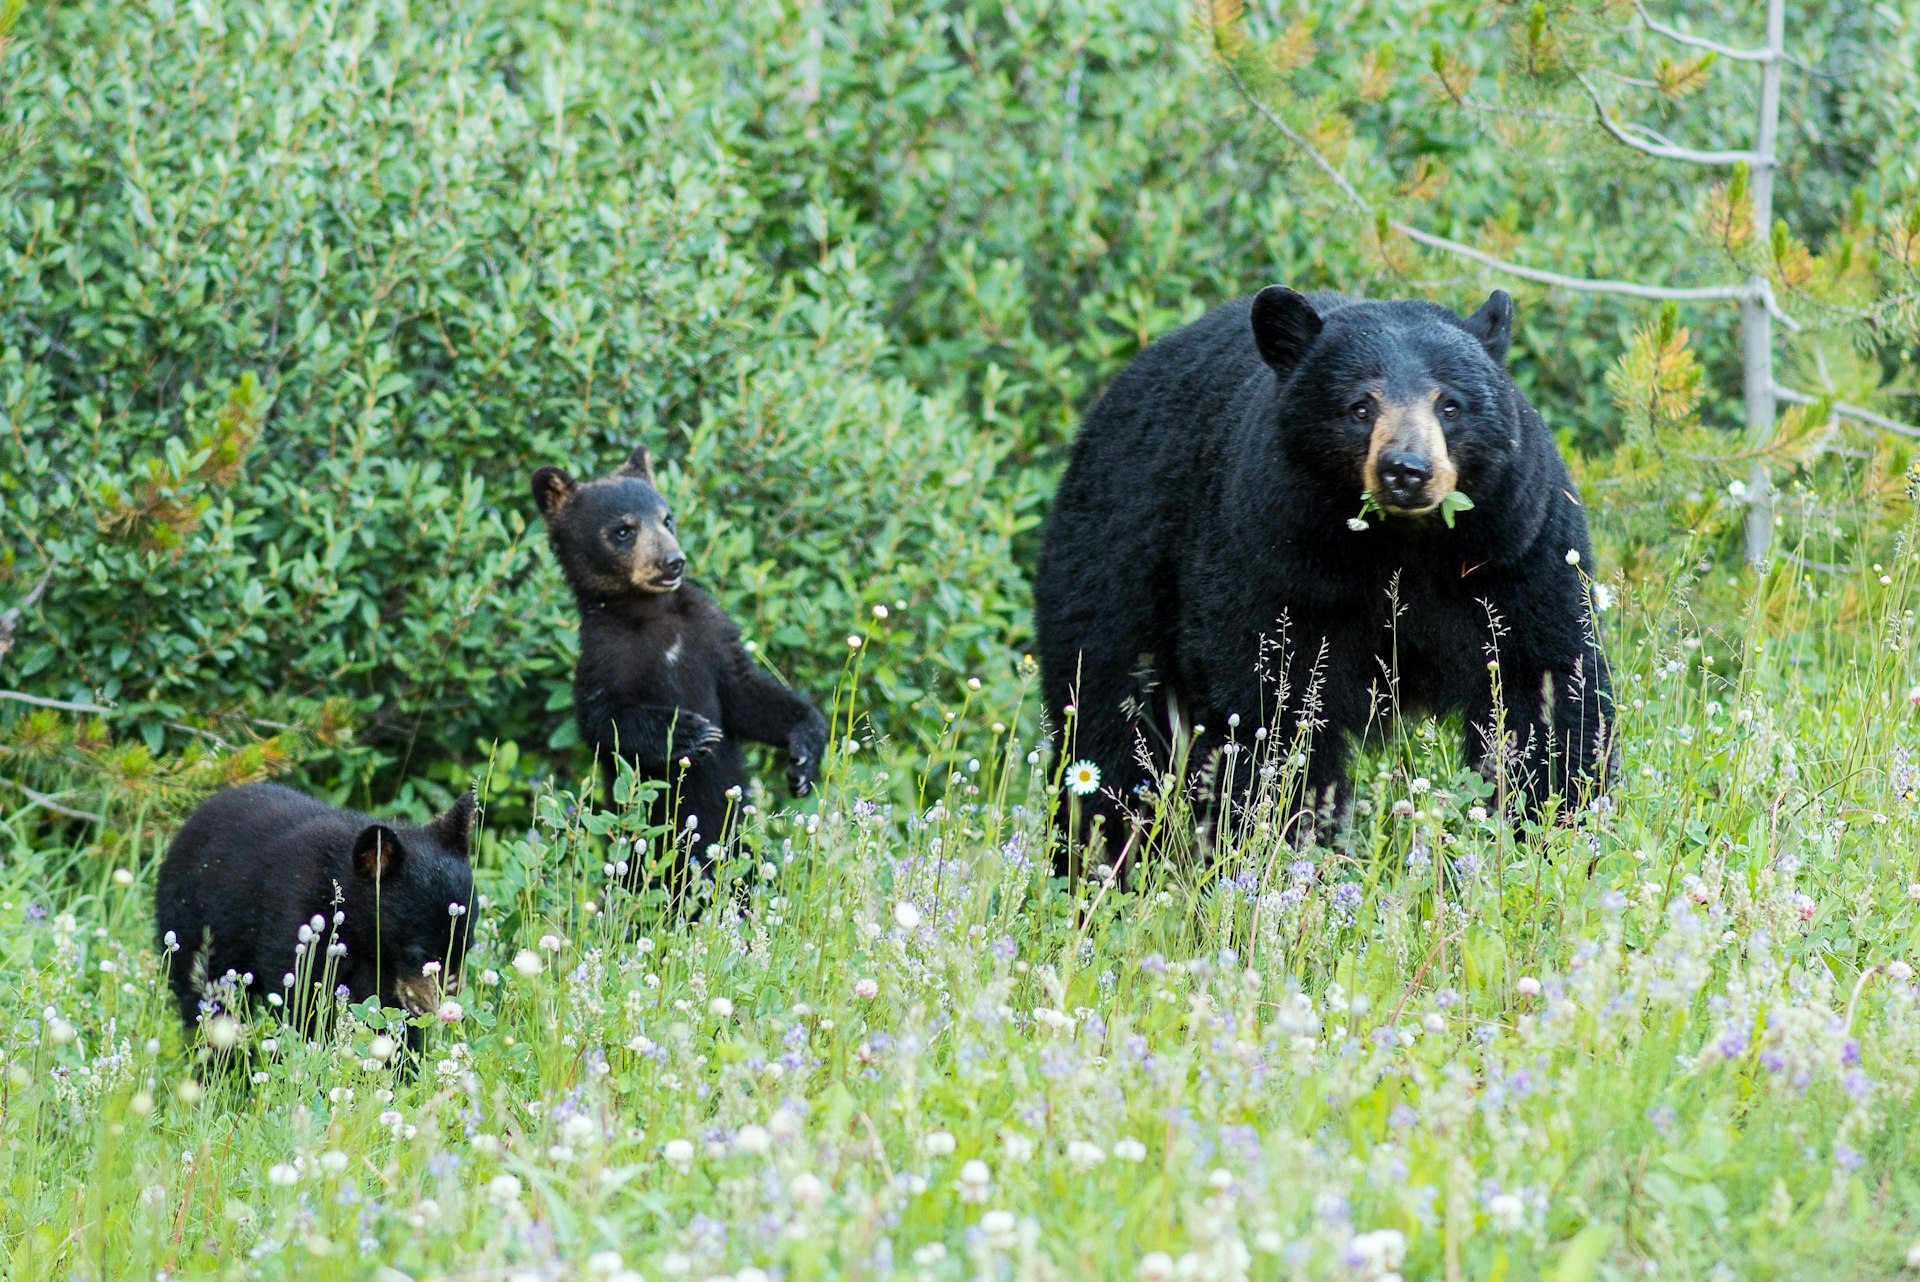 Bear mother with two cups on a lawn with flowers near Jasper, Canada